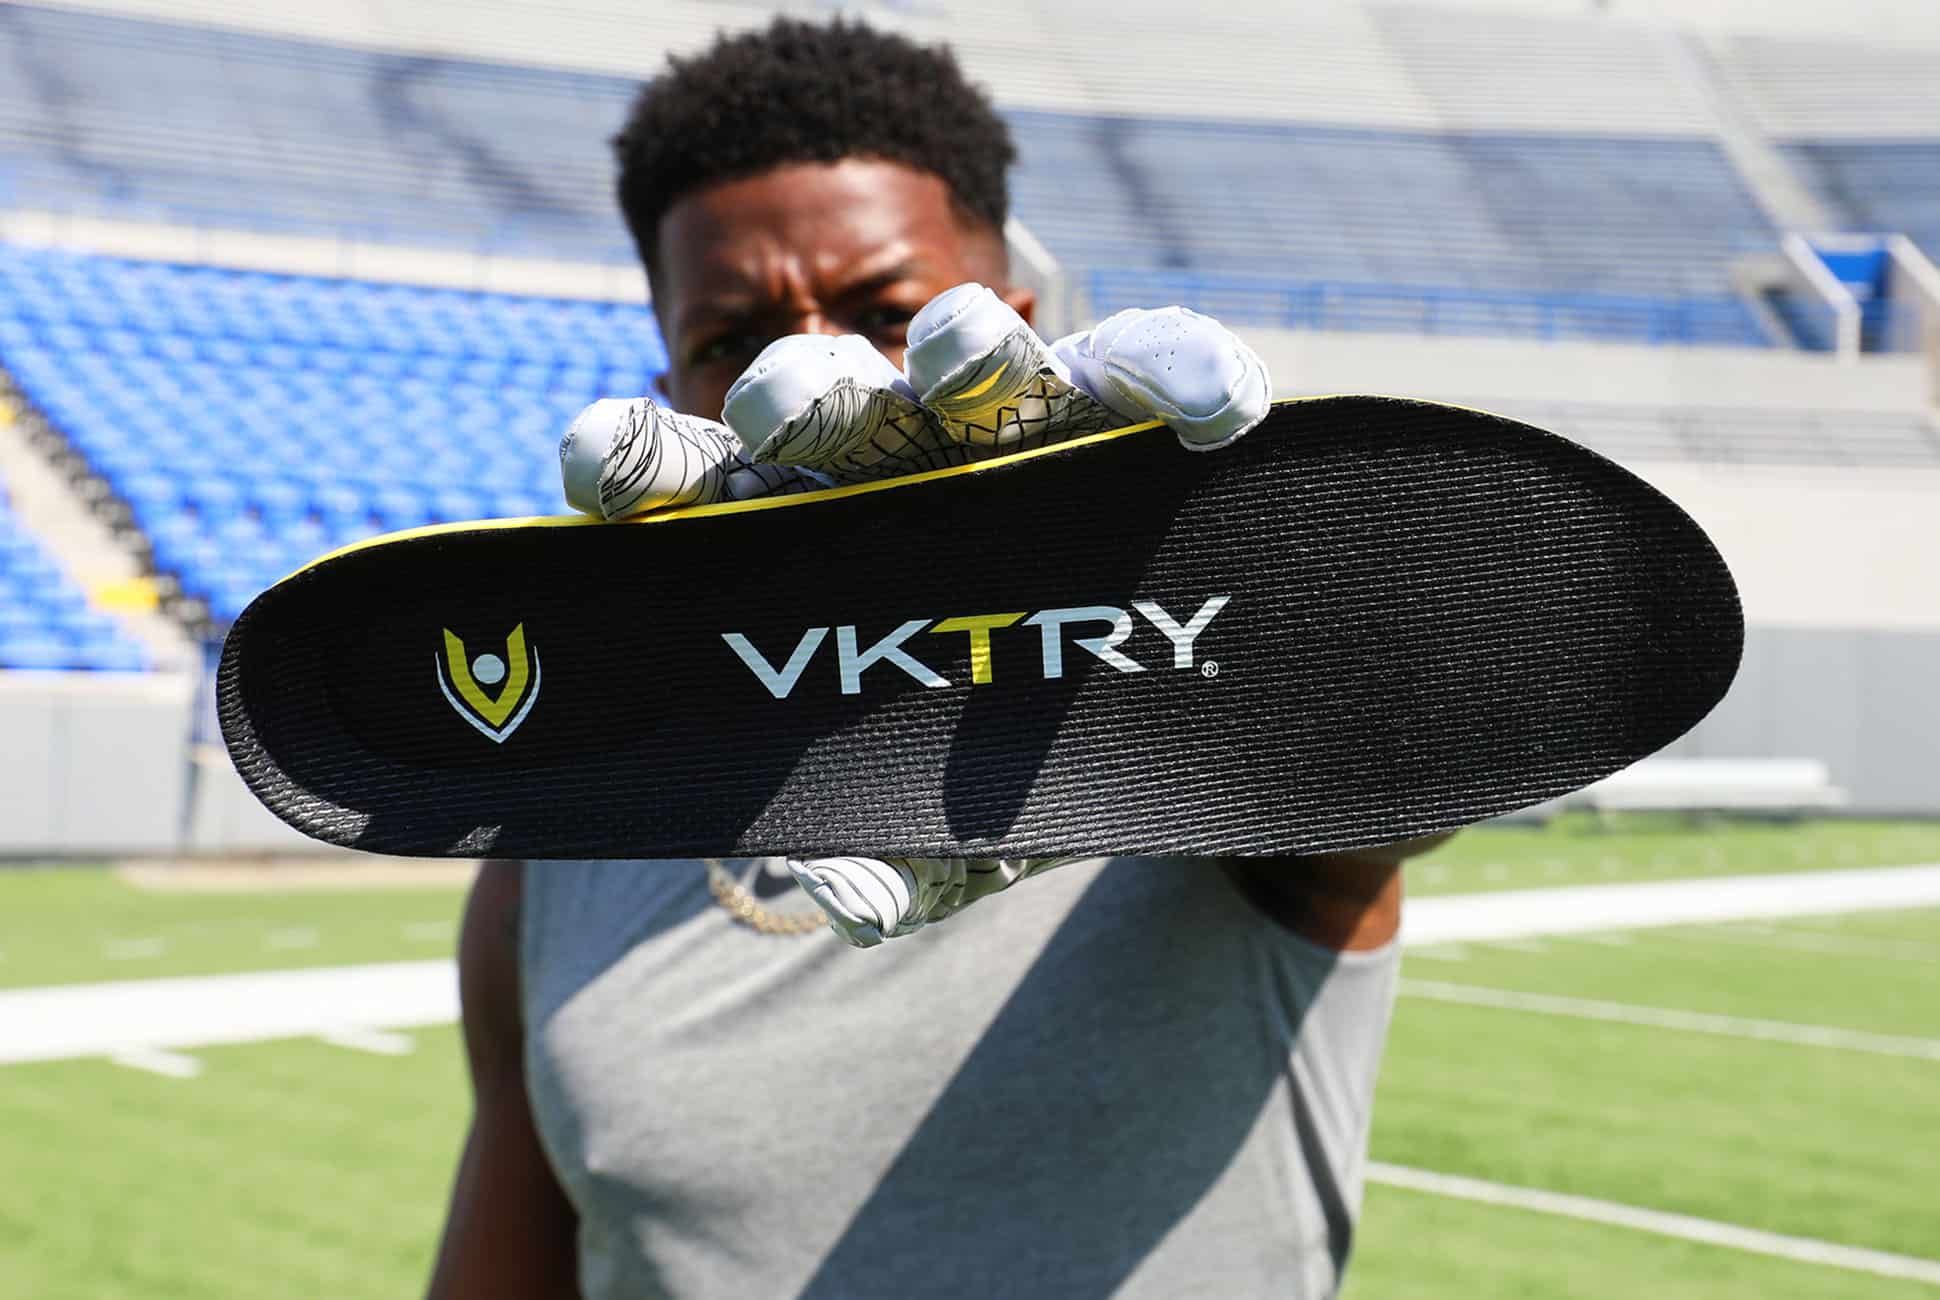 vktry performance insoles review